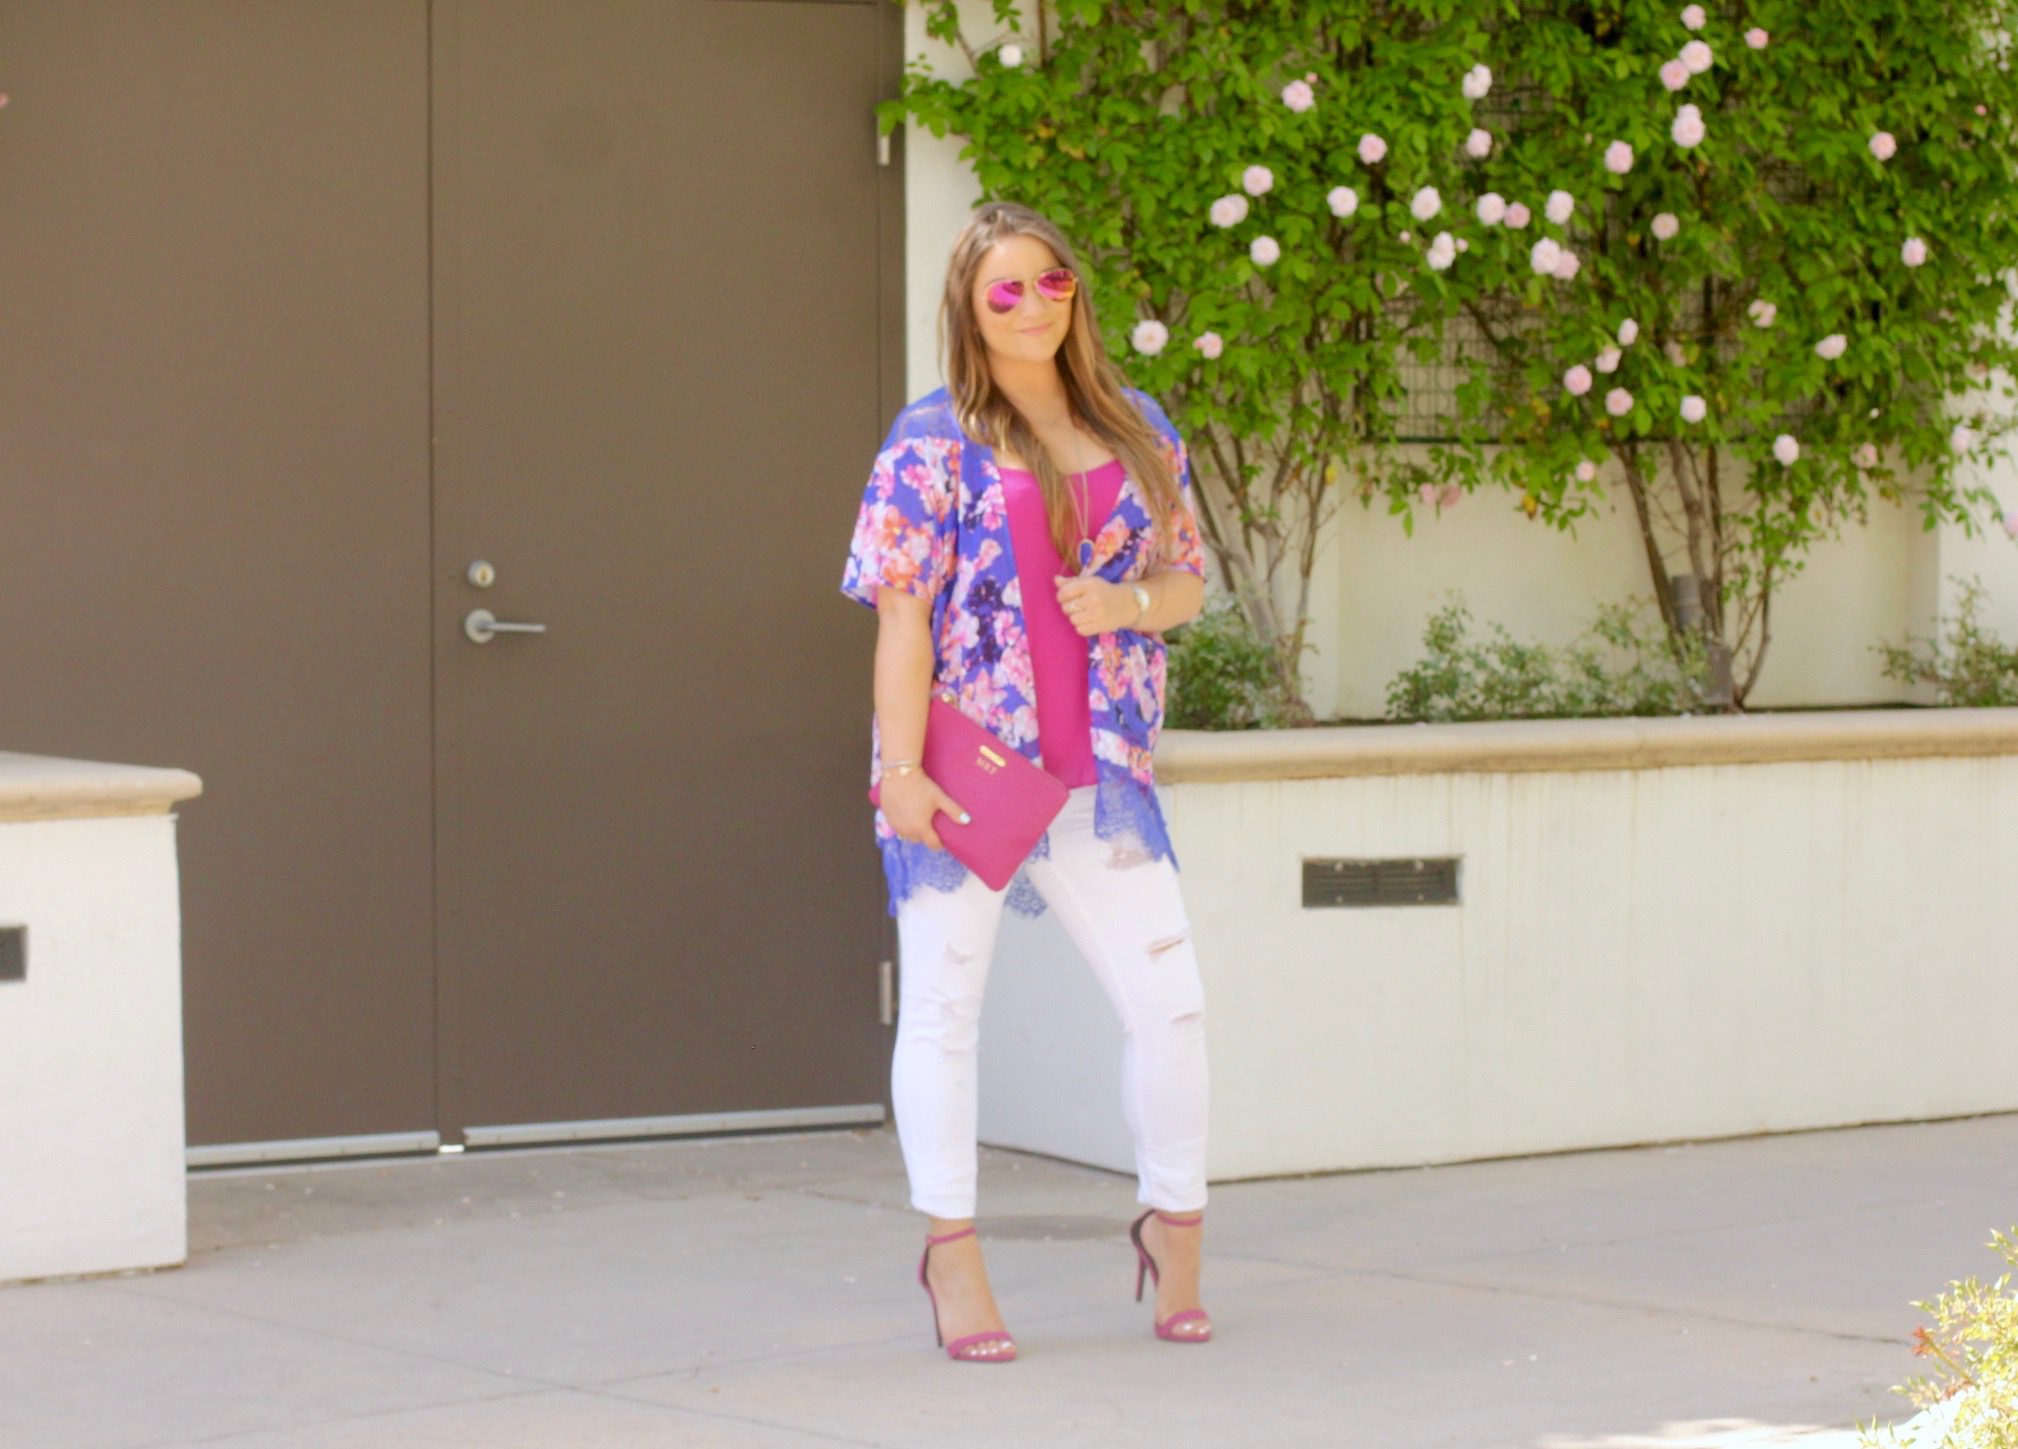 missyonmadison, melissa tierney, floral kimono, fuschia ankle strap heels, fuschia ankle strap sandals, fuschia heels, old navy, white skinny jeans, old navy white rockstar jeans, gigi ny clutch, gigi ny, gigi ny magenta clutch, kendra scott, kendra scott rayne necklace, mirrored aviators, pink mirrored aviators, pink chiffon camisole, apt 9 camisole, fashion blogger, style blogger, spring style,